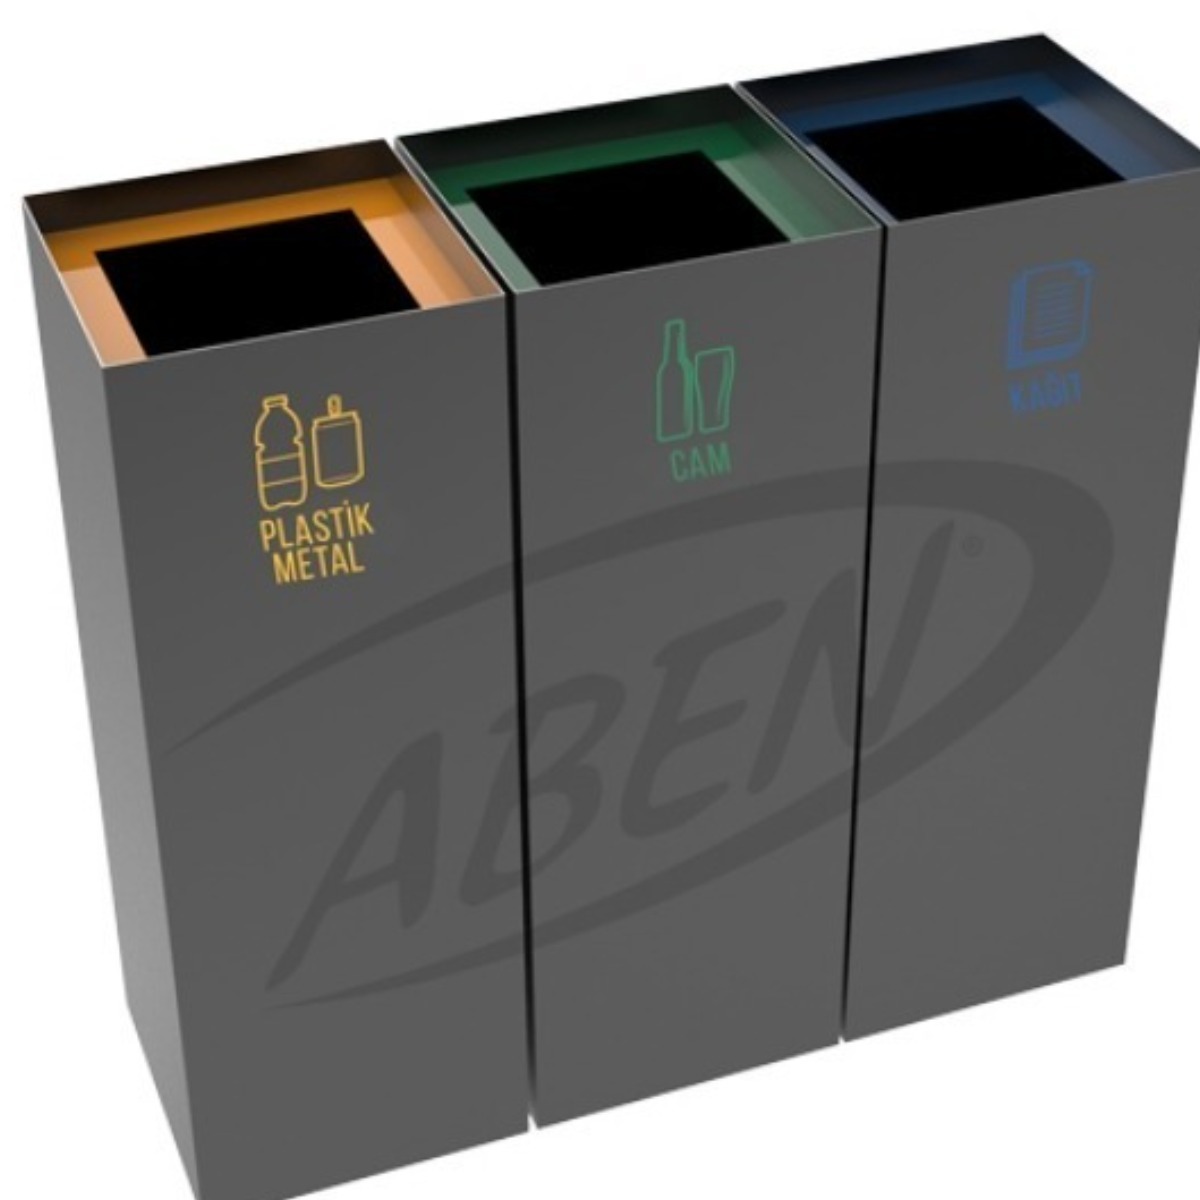 AB-792 3'Part Recycle Bin